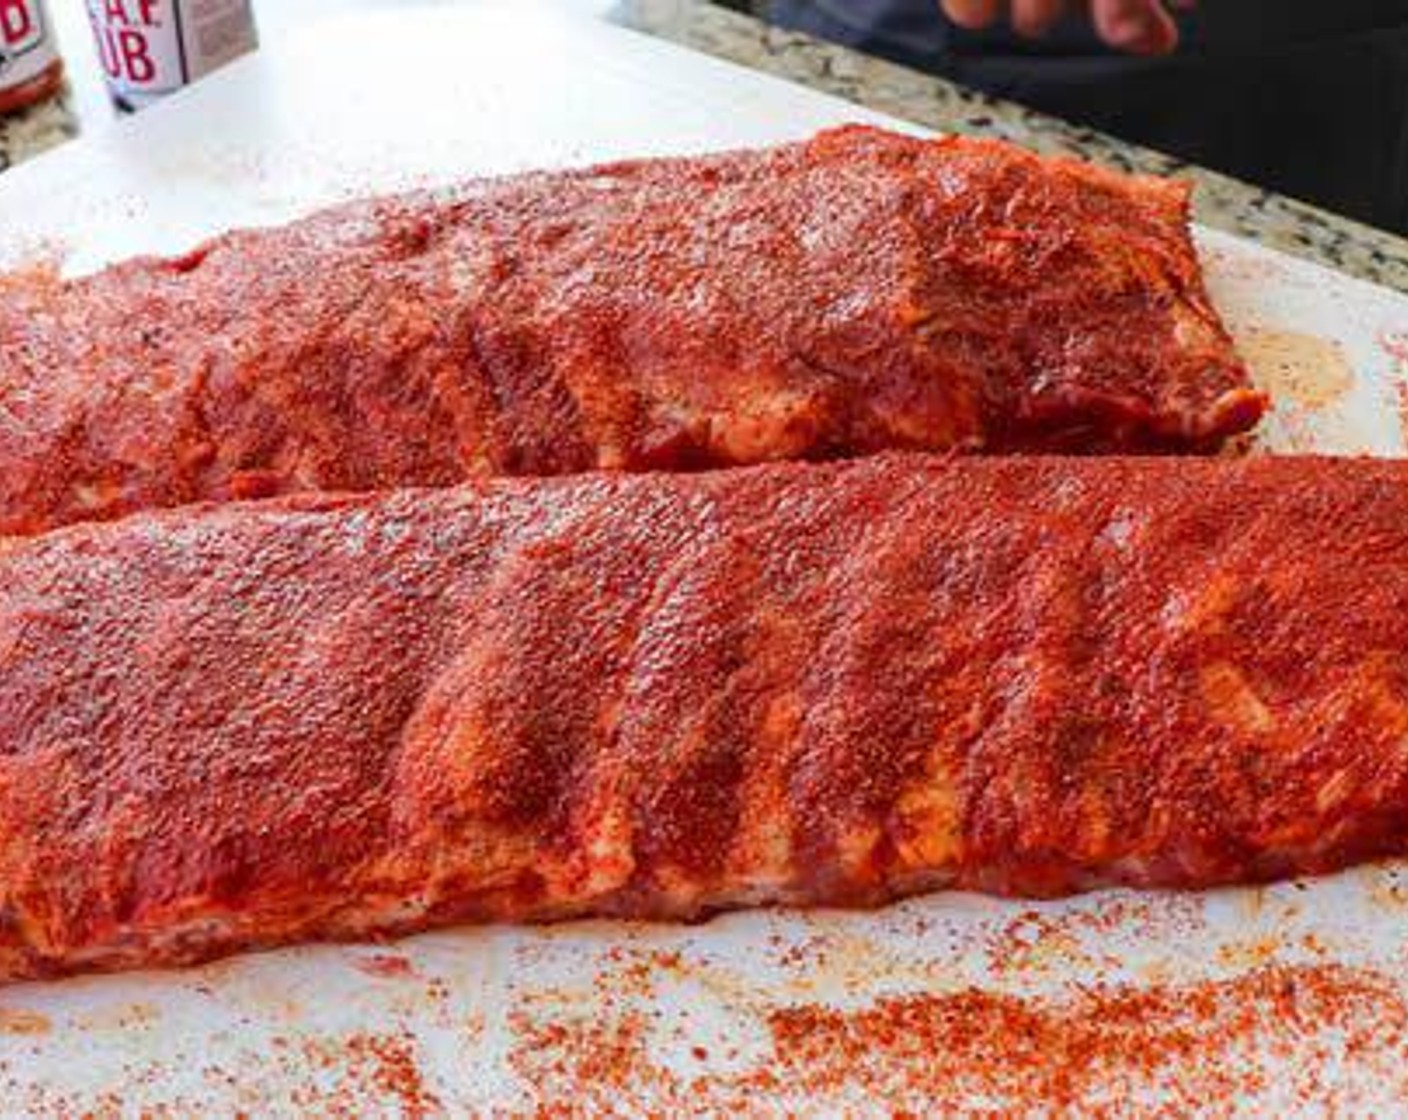 step 3 Season each slab on both sides with All-Purpose Spice Rub (1/4 cup) followed by Barbecue Rub (1/4 cup).